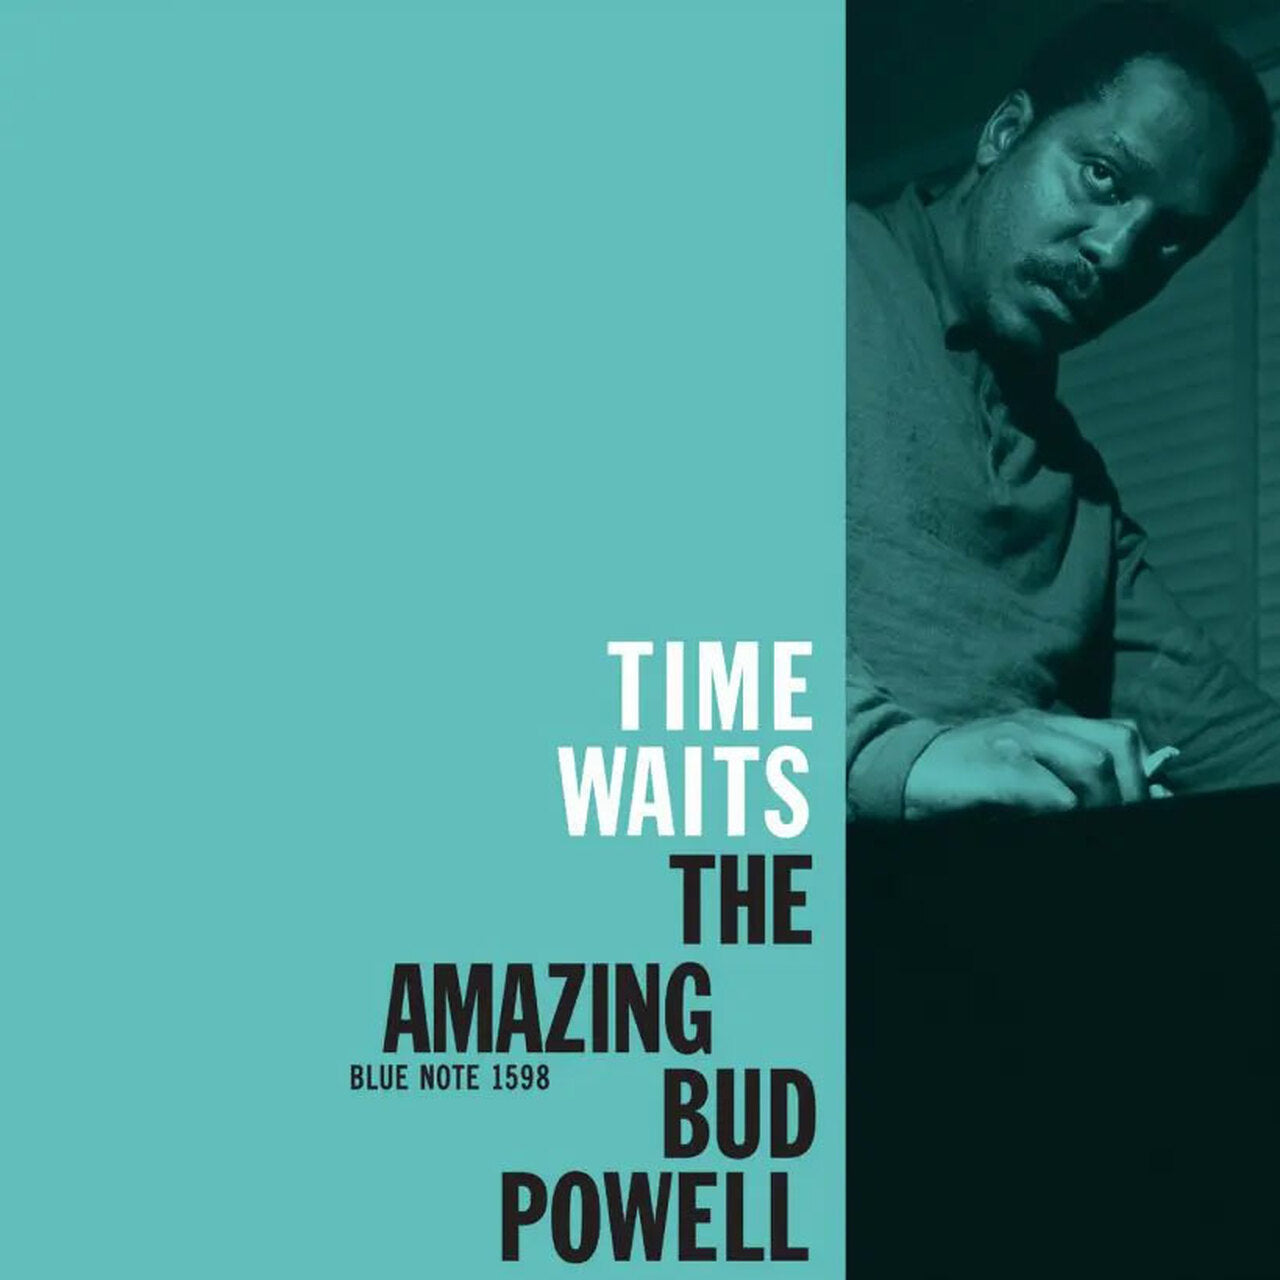 Bud Powell - Time Waits: The Amazing Bud Powell - Blue Note Classic LP